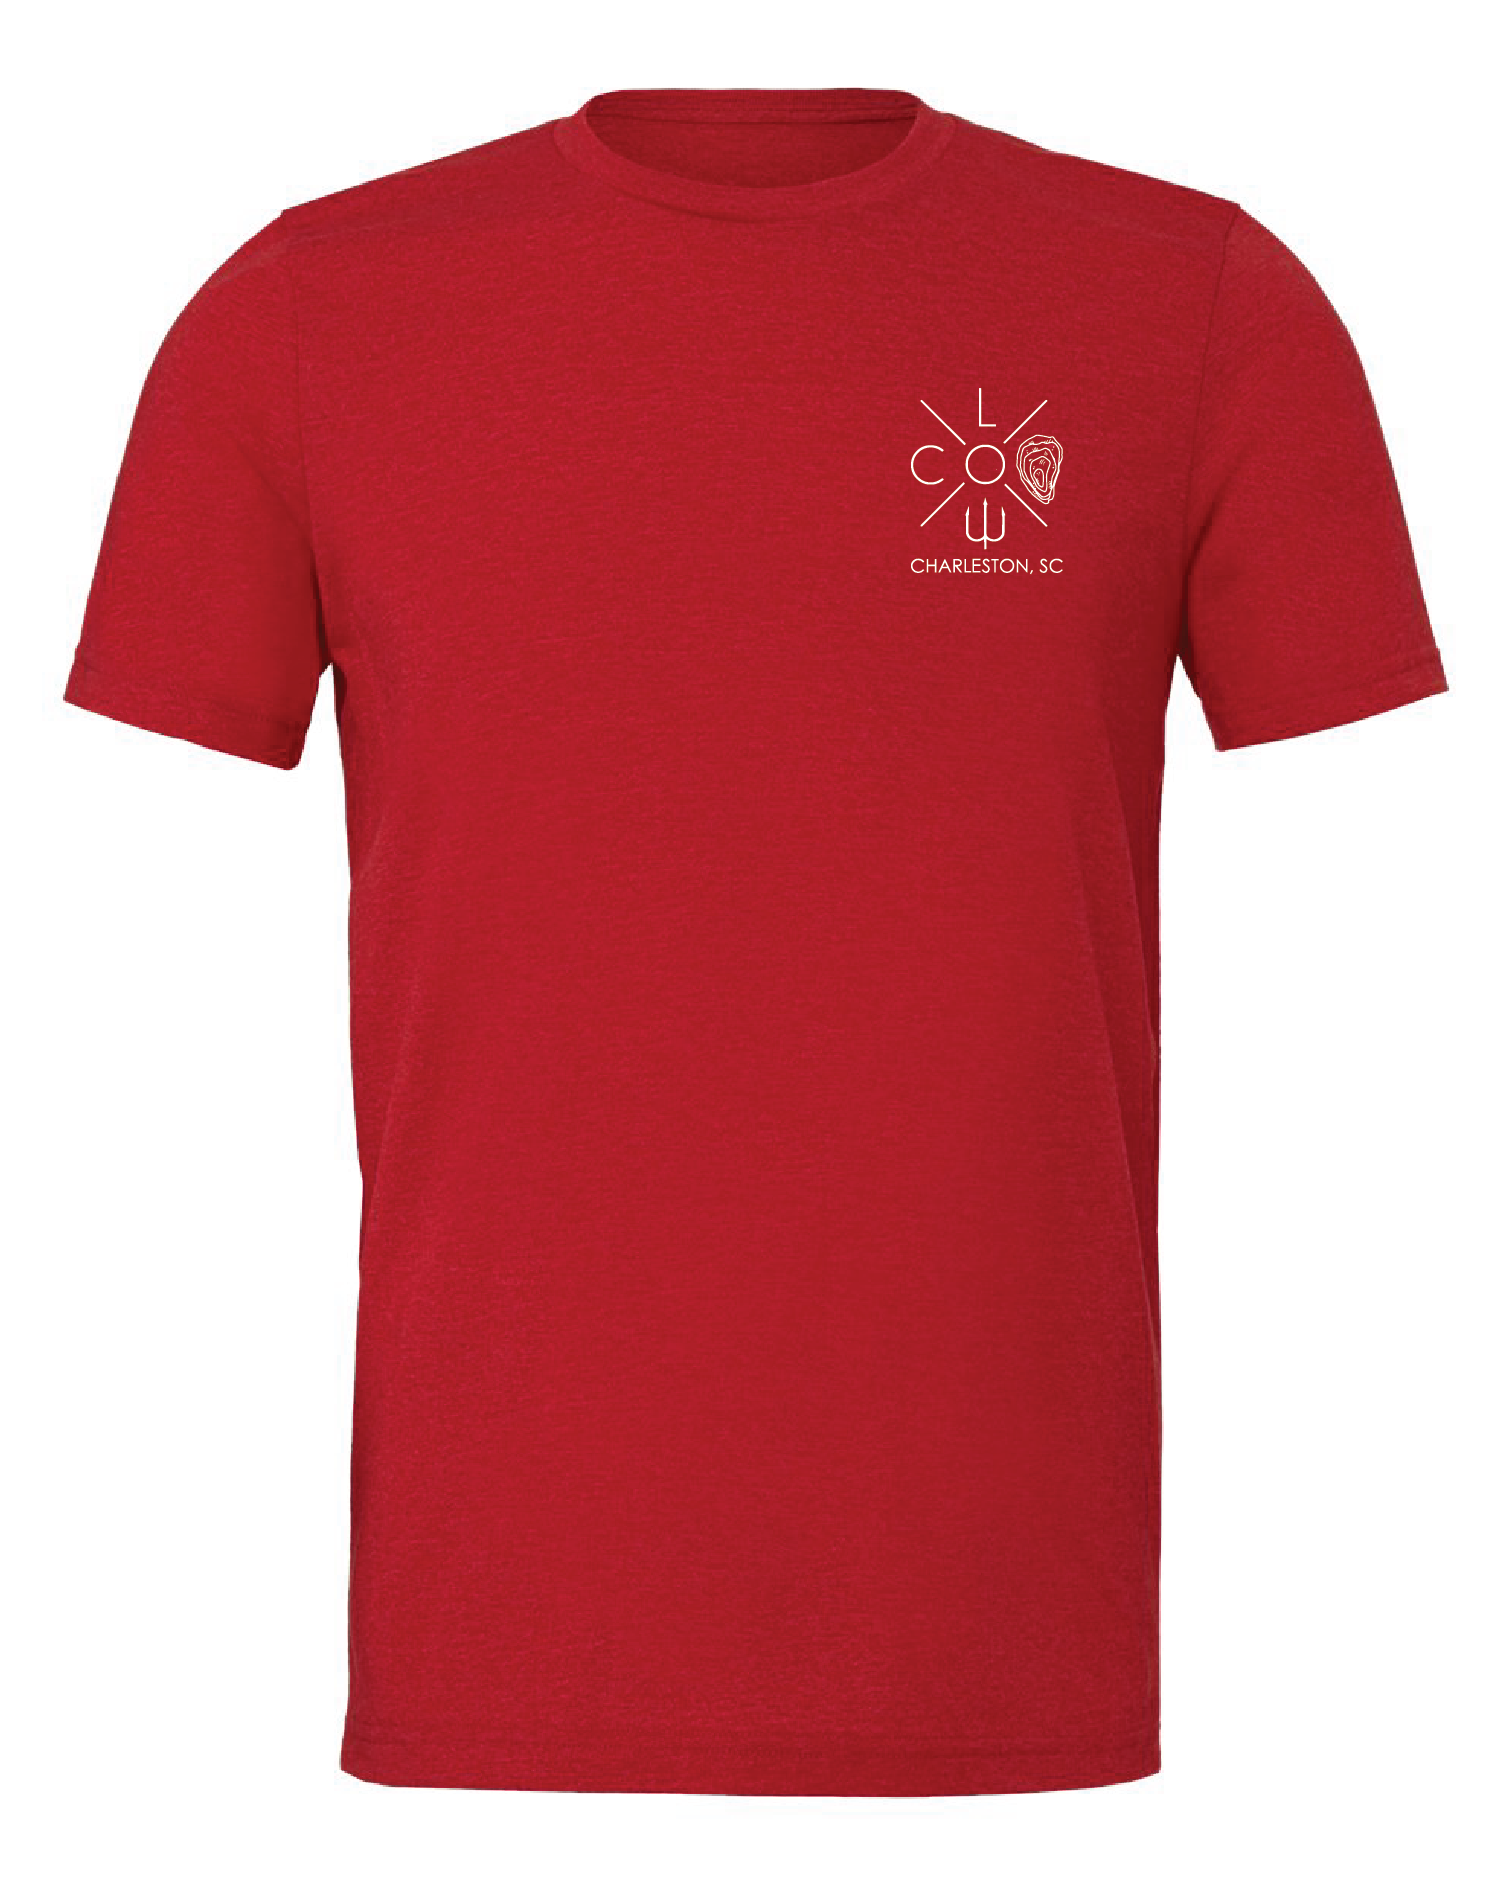 The Jolly Shucker Tee in Red Heather